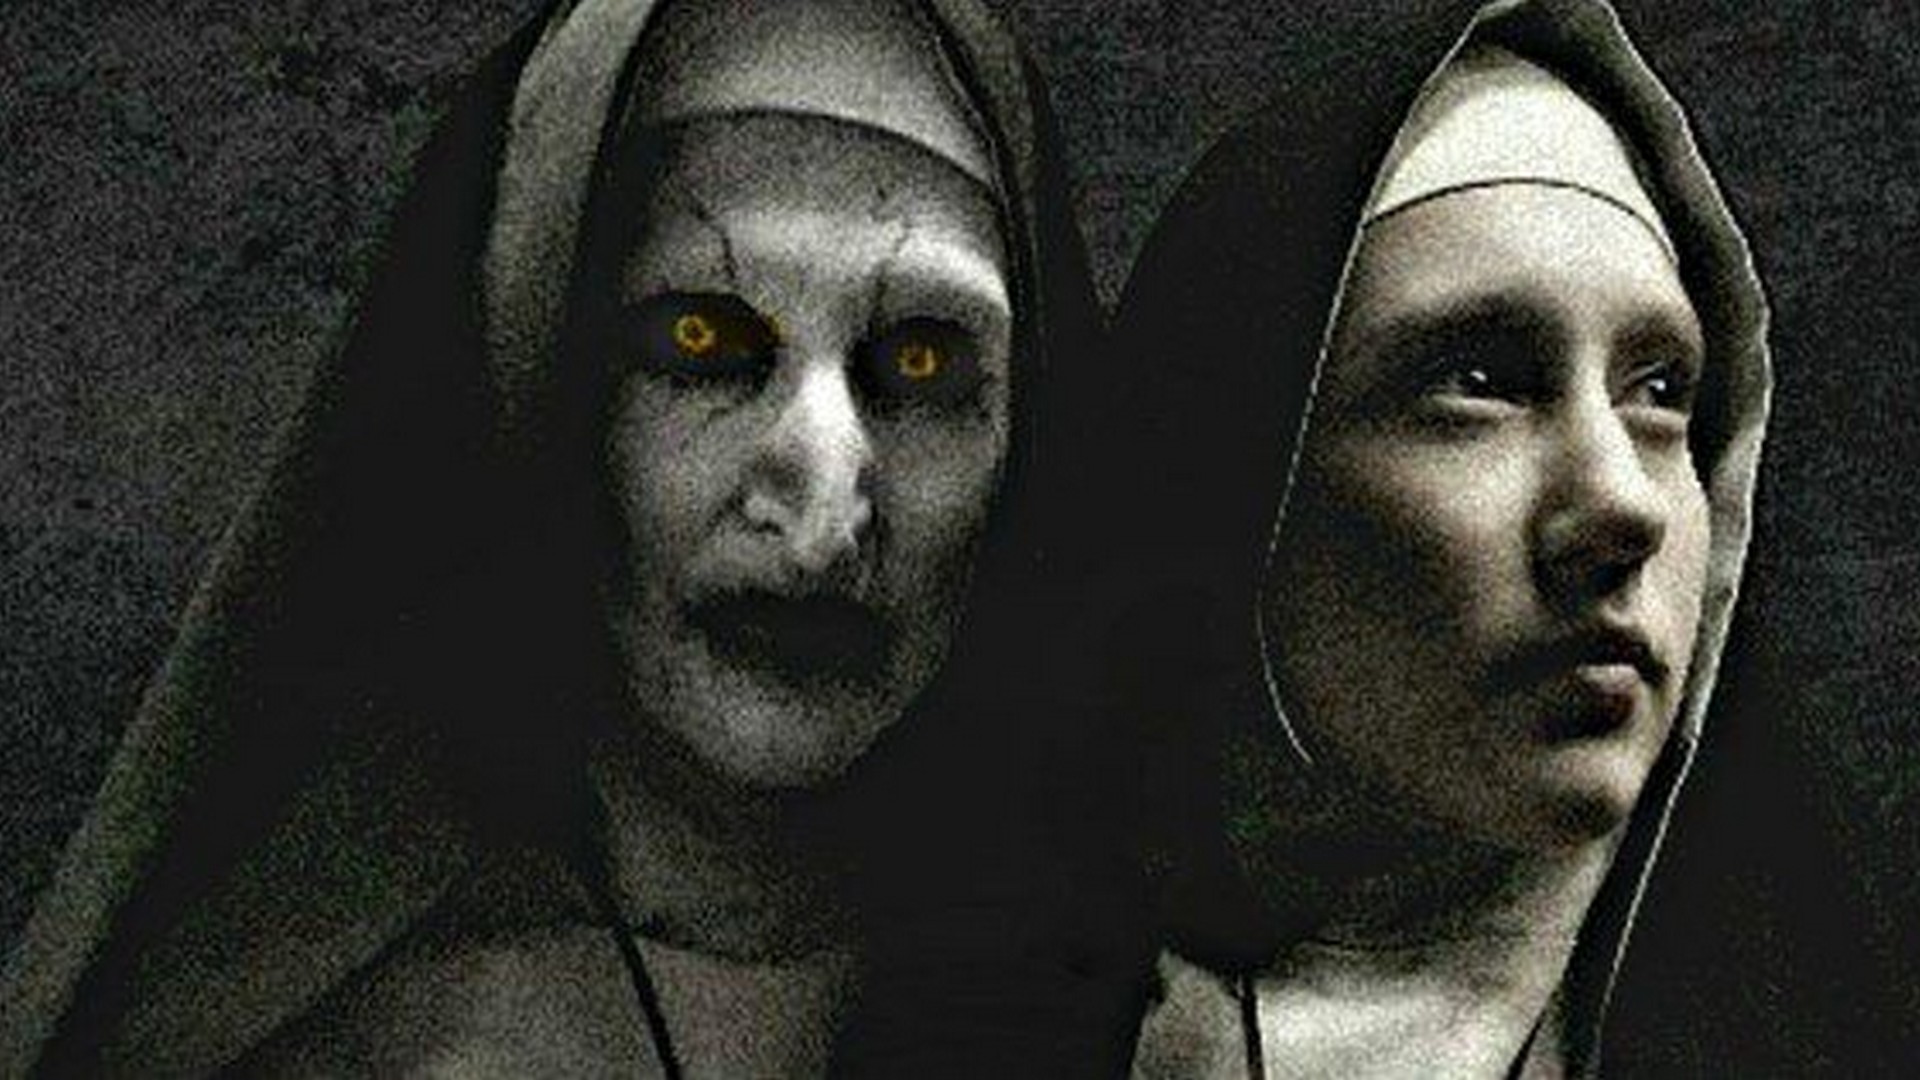 Wallpaper The Nun Valak Desktop with resolution 1920X1080 pixel. You can use this wallpaper as background for your desktop Computer Screensavers, Android or iPhone smartphones